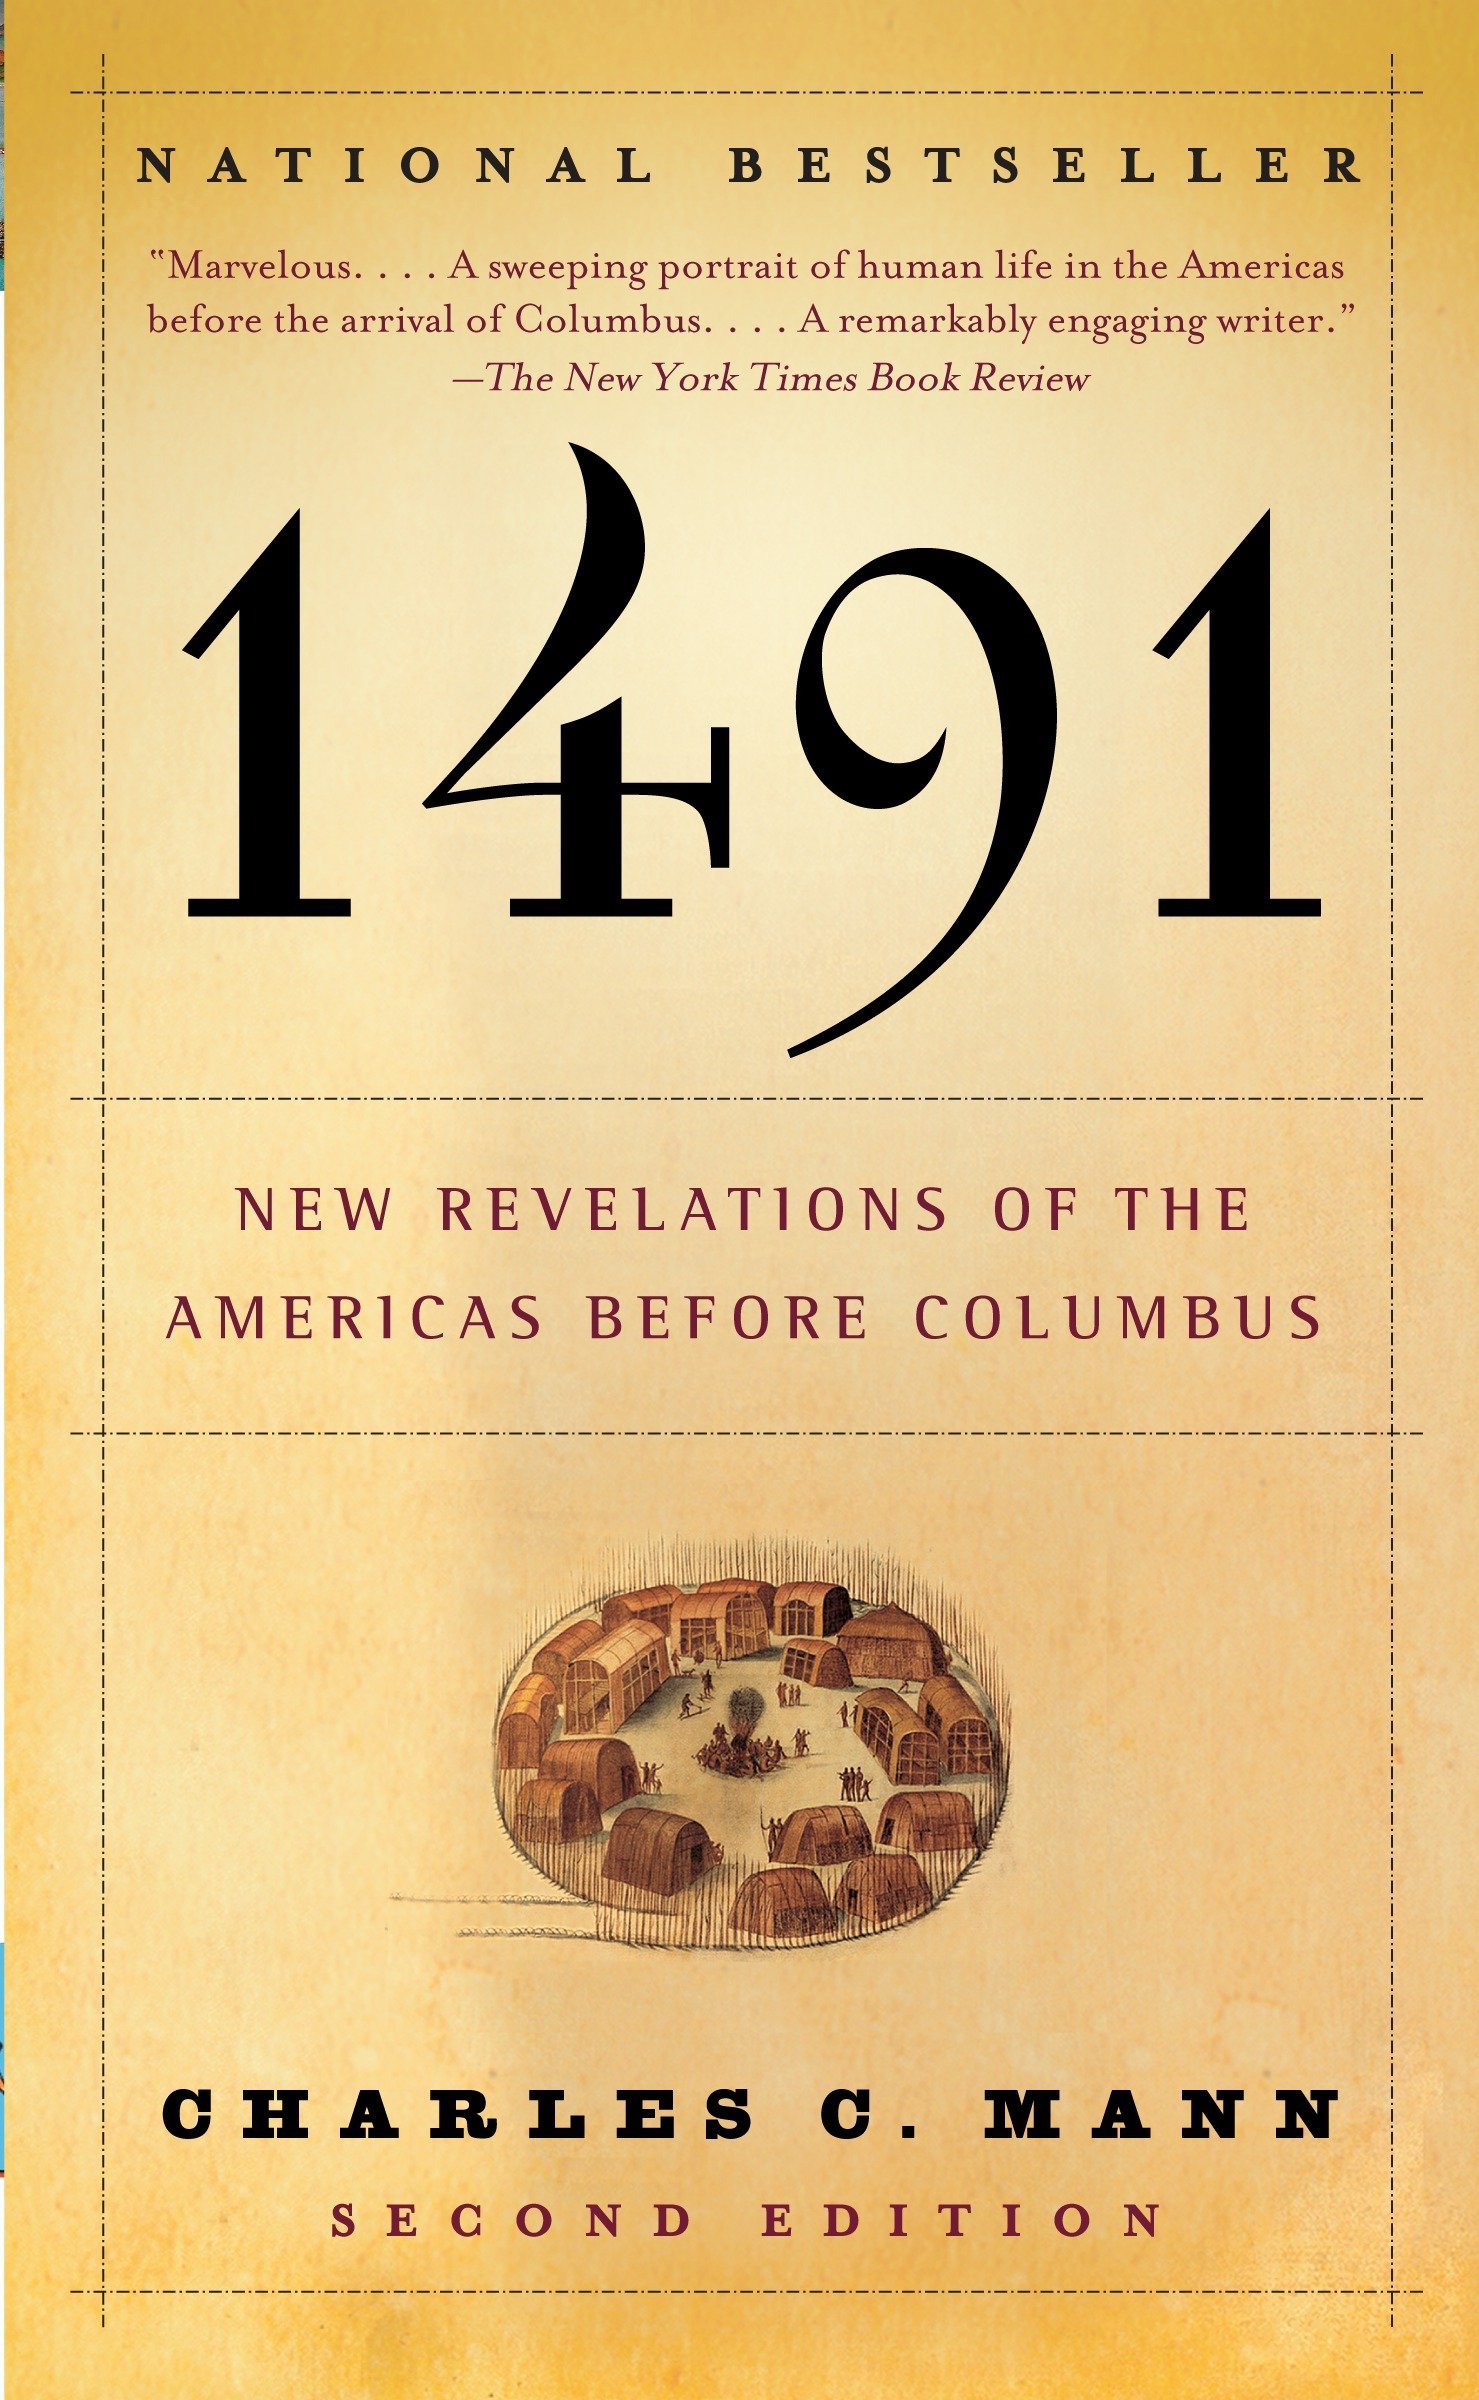 New Revelations of the Americas Before Columbus